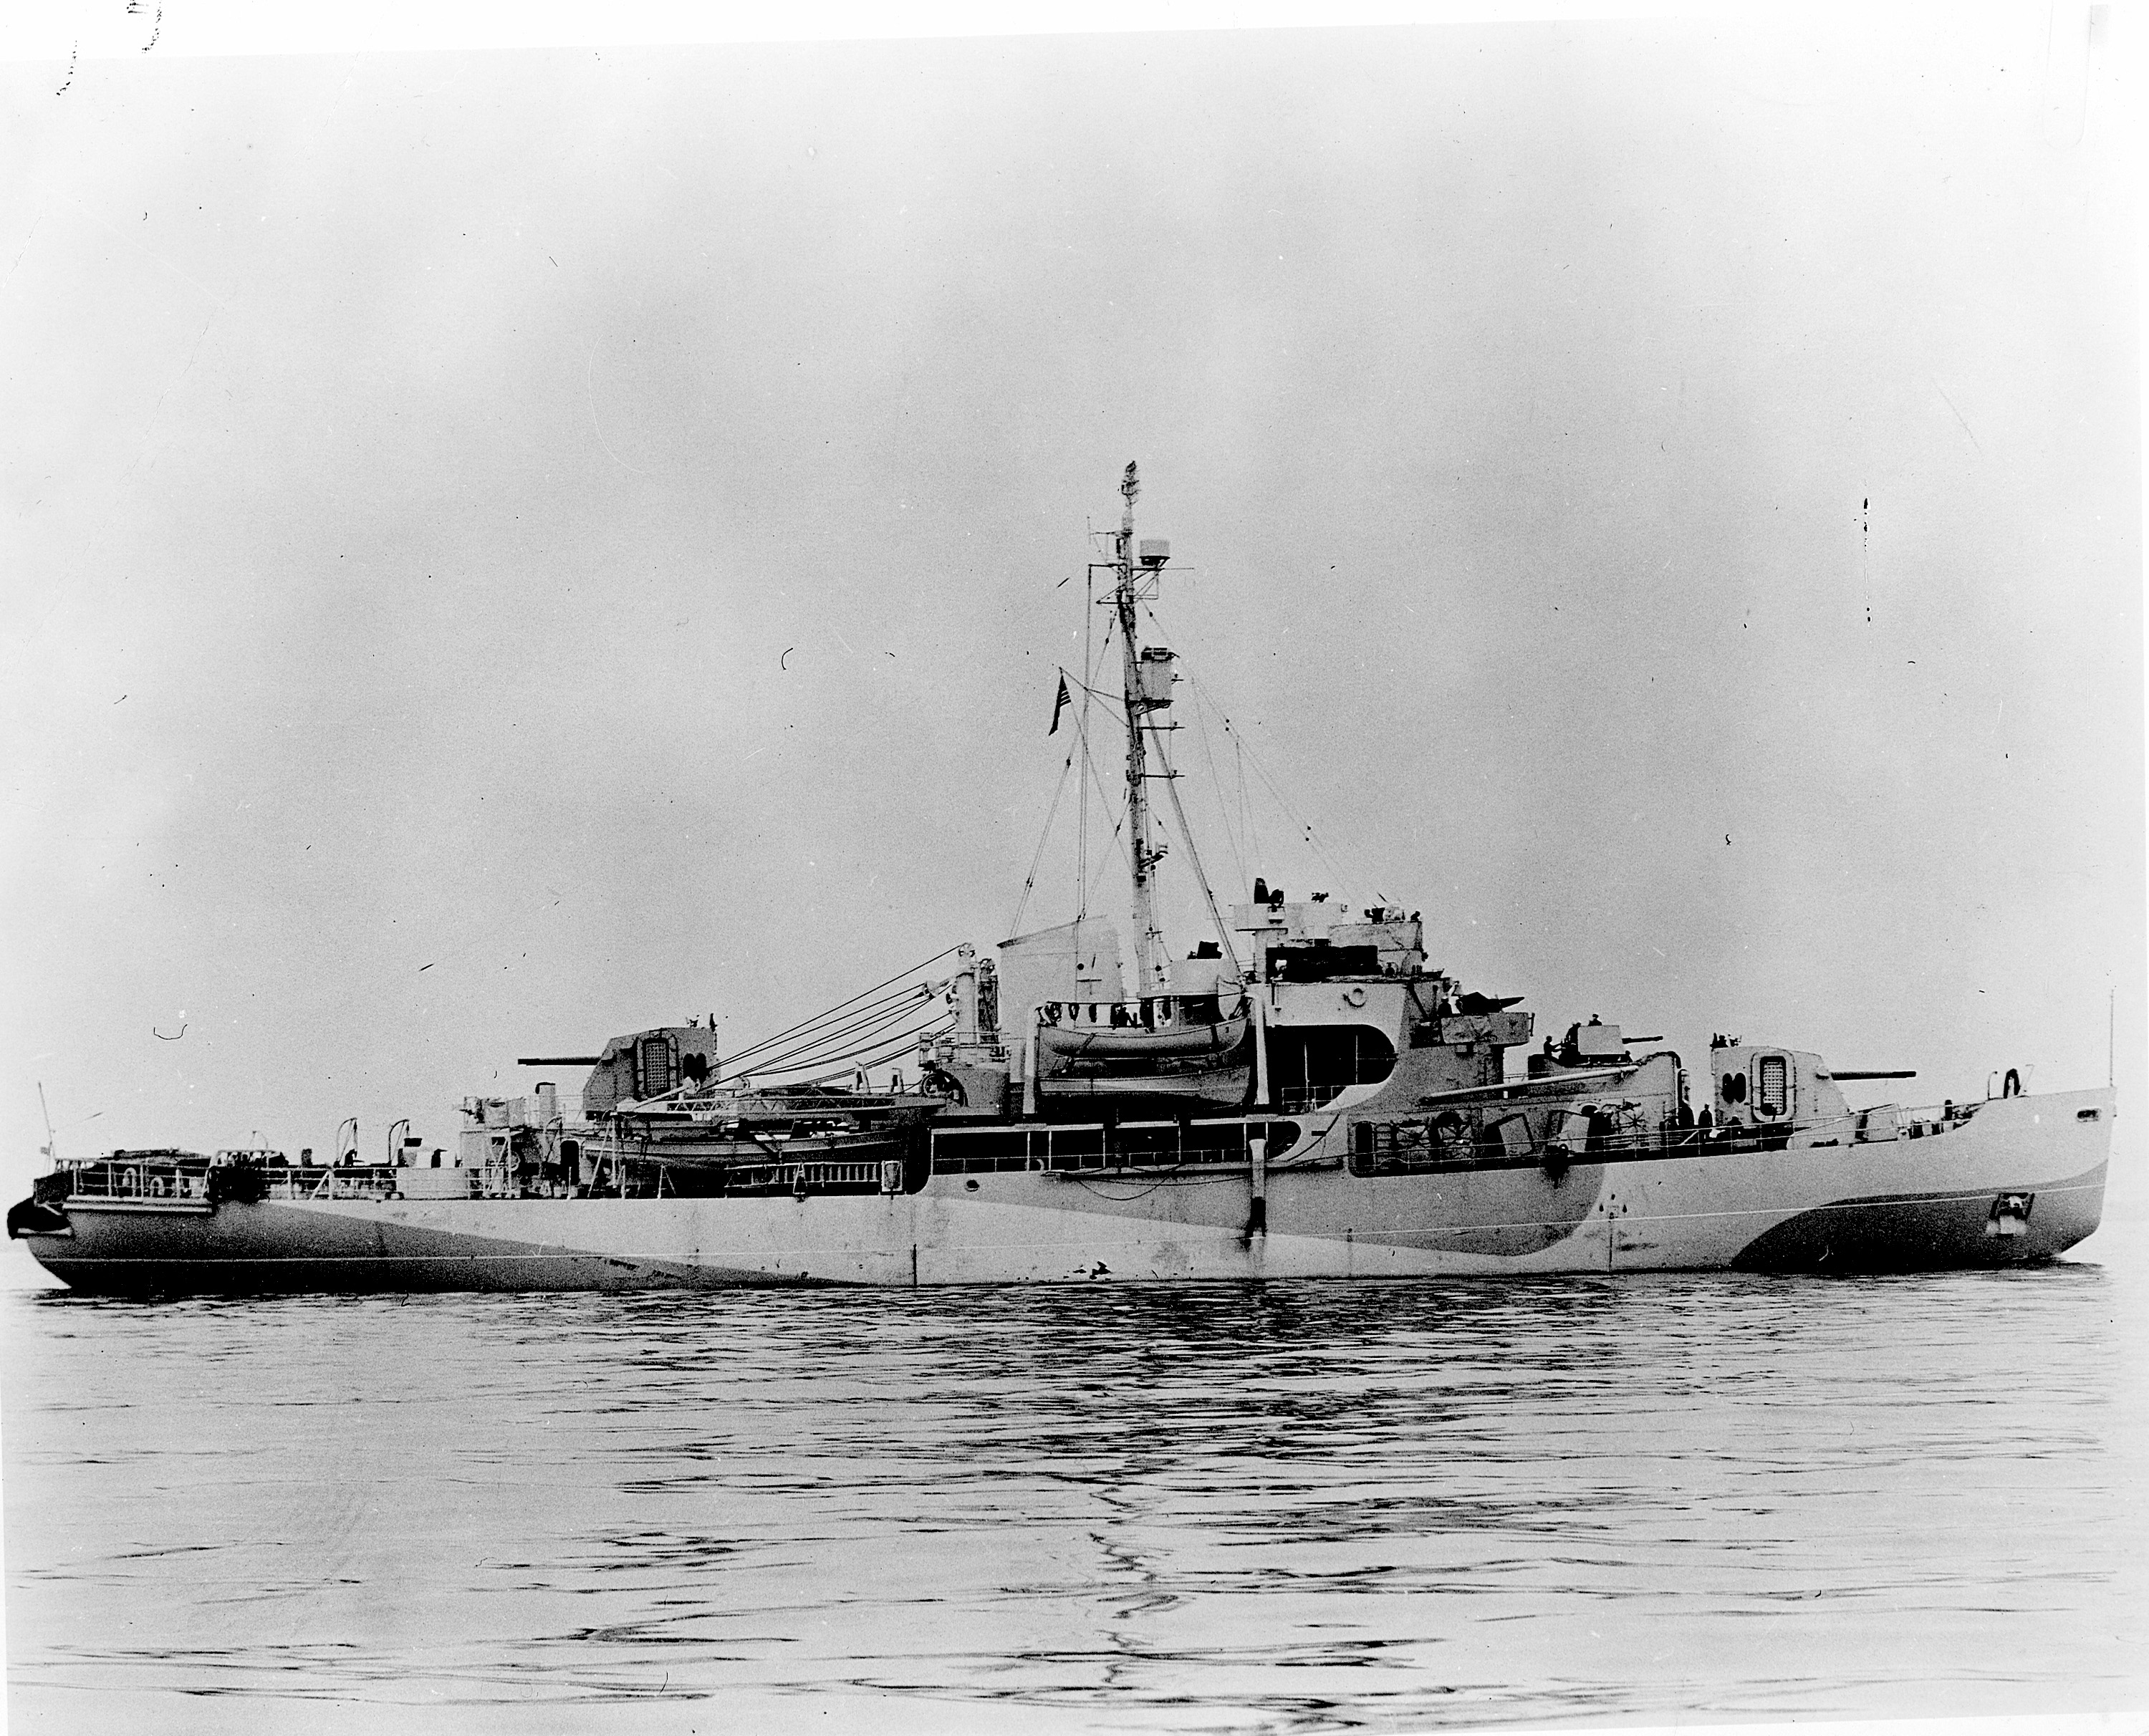 Icebreaker Eastwind in World War II’s Greenland Patrol with ice camouflage paint scheme. Thomas was the plank-owning captain of the heavily armed icebreaker. (U.S. Coast Guard)